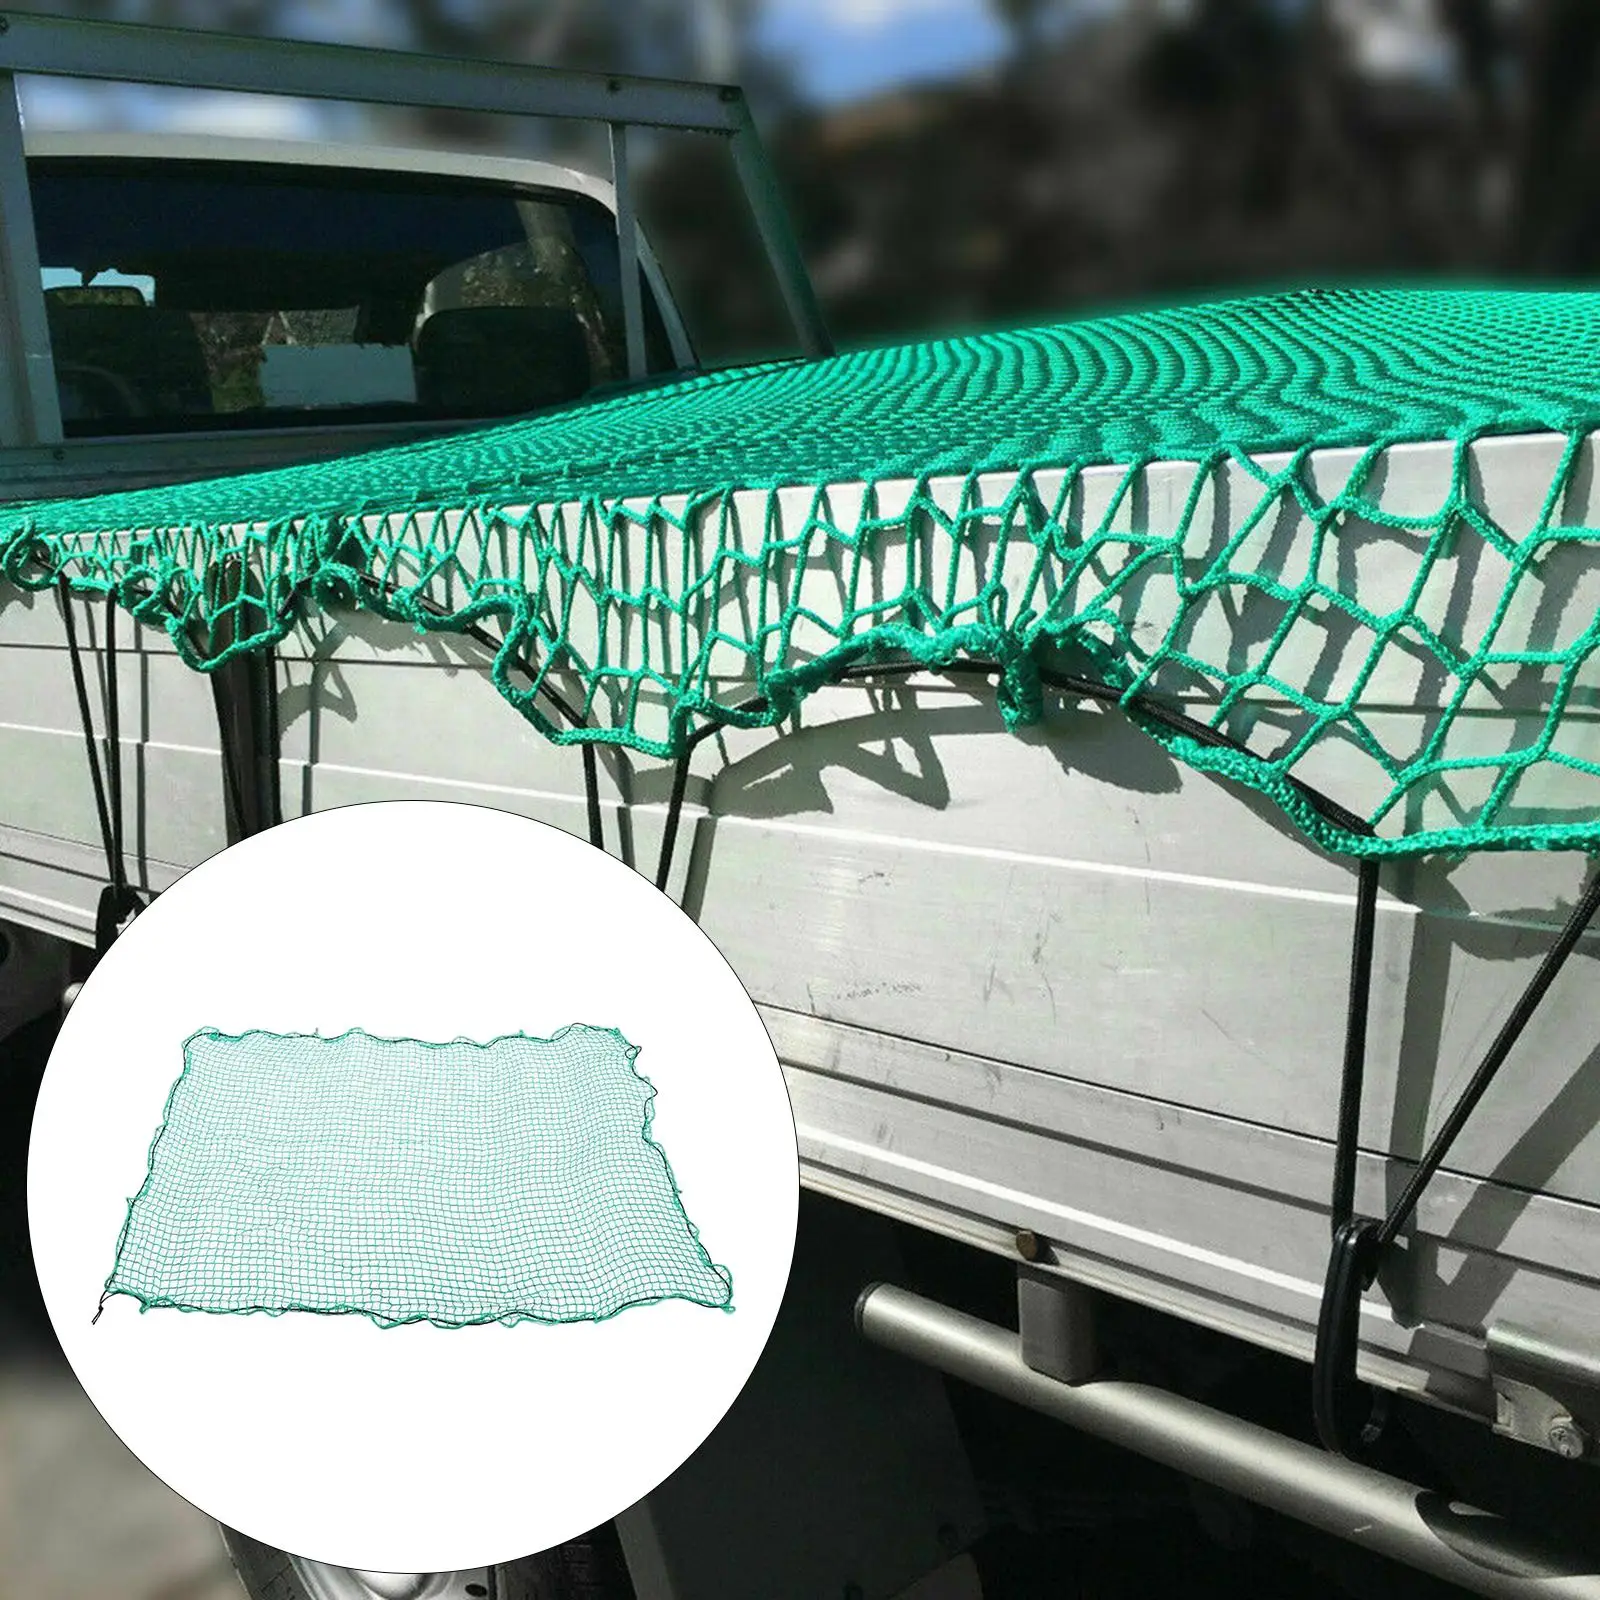 Heavy Duty Bungee Cargo Net 8.2` x 11.5` Mesh Net Stretchable Adjustable Car Storage Net Fit for Truck Bed Pickup Truck Trailer